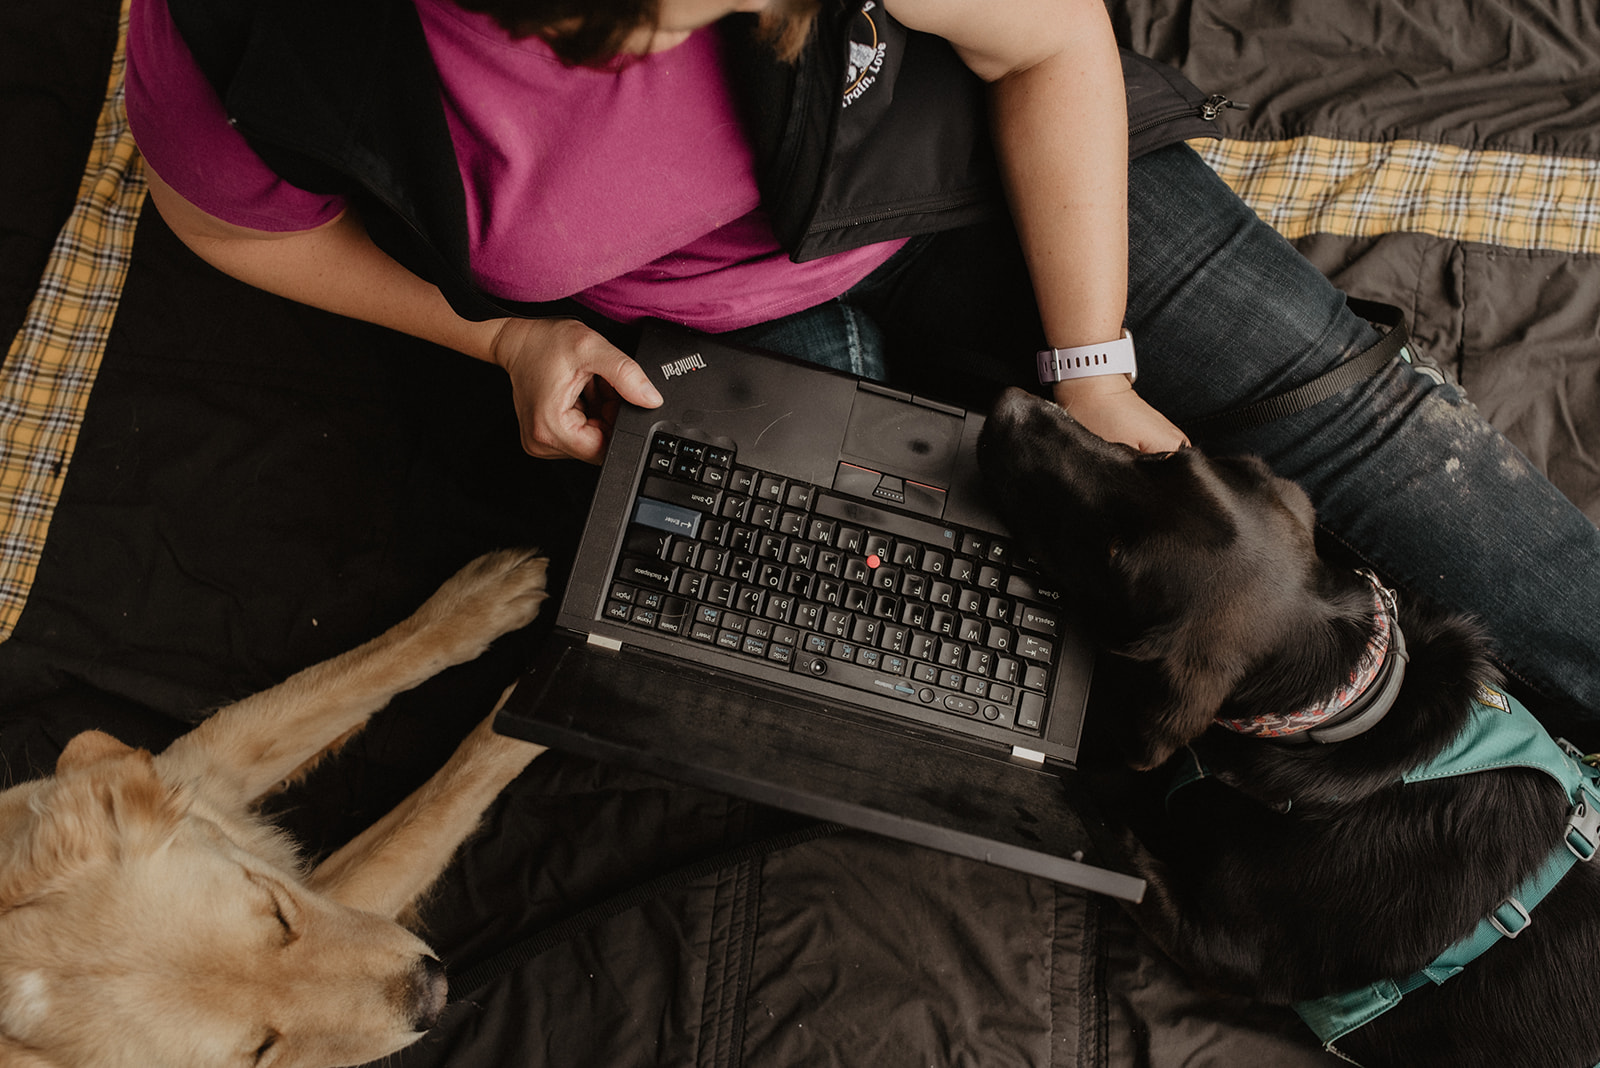 A compute is held by a woman, while a dog rests his chin on it